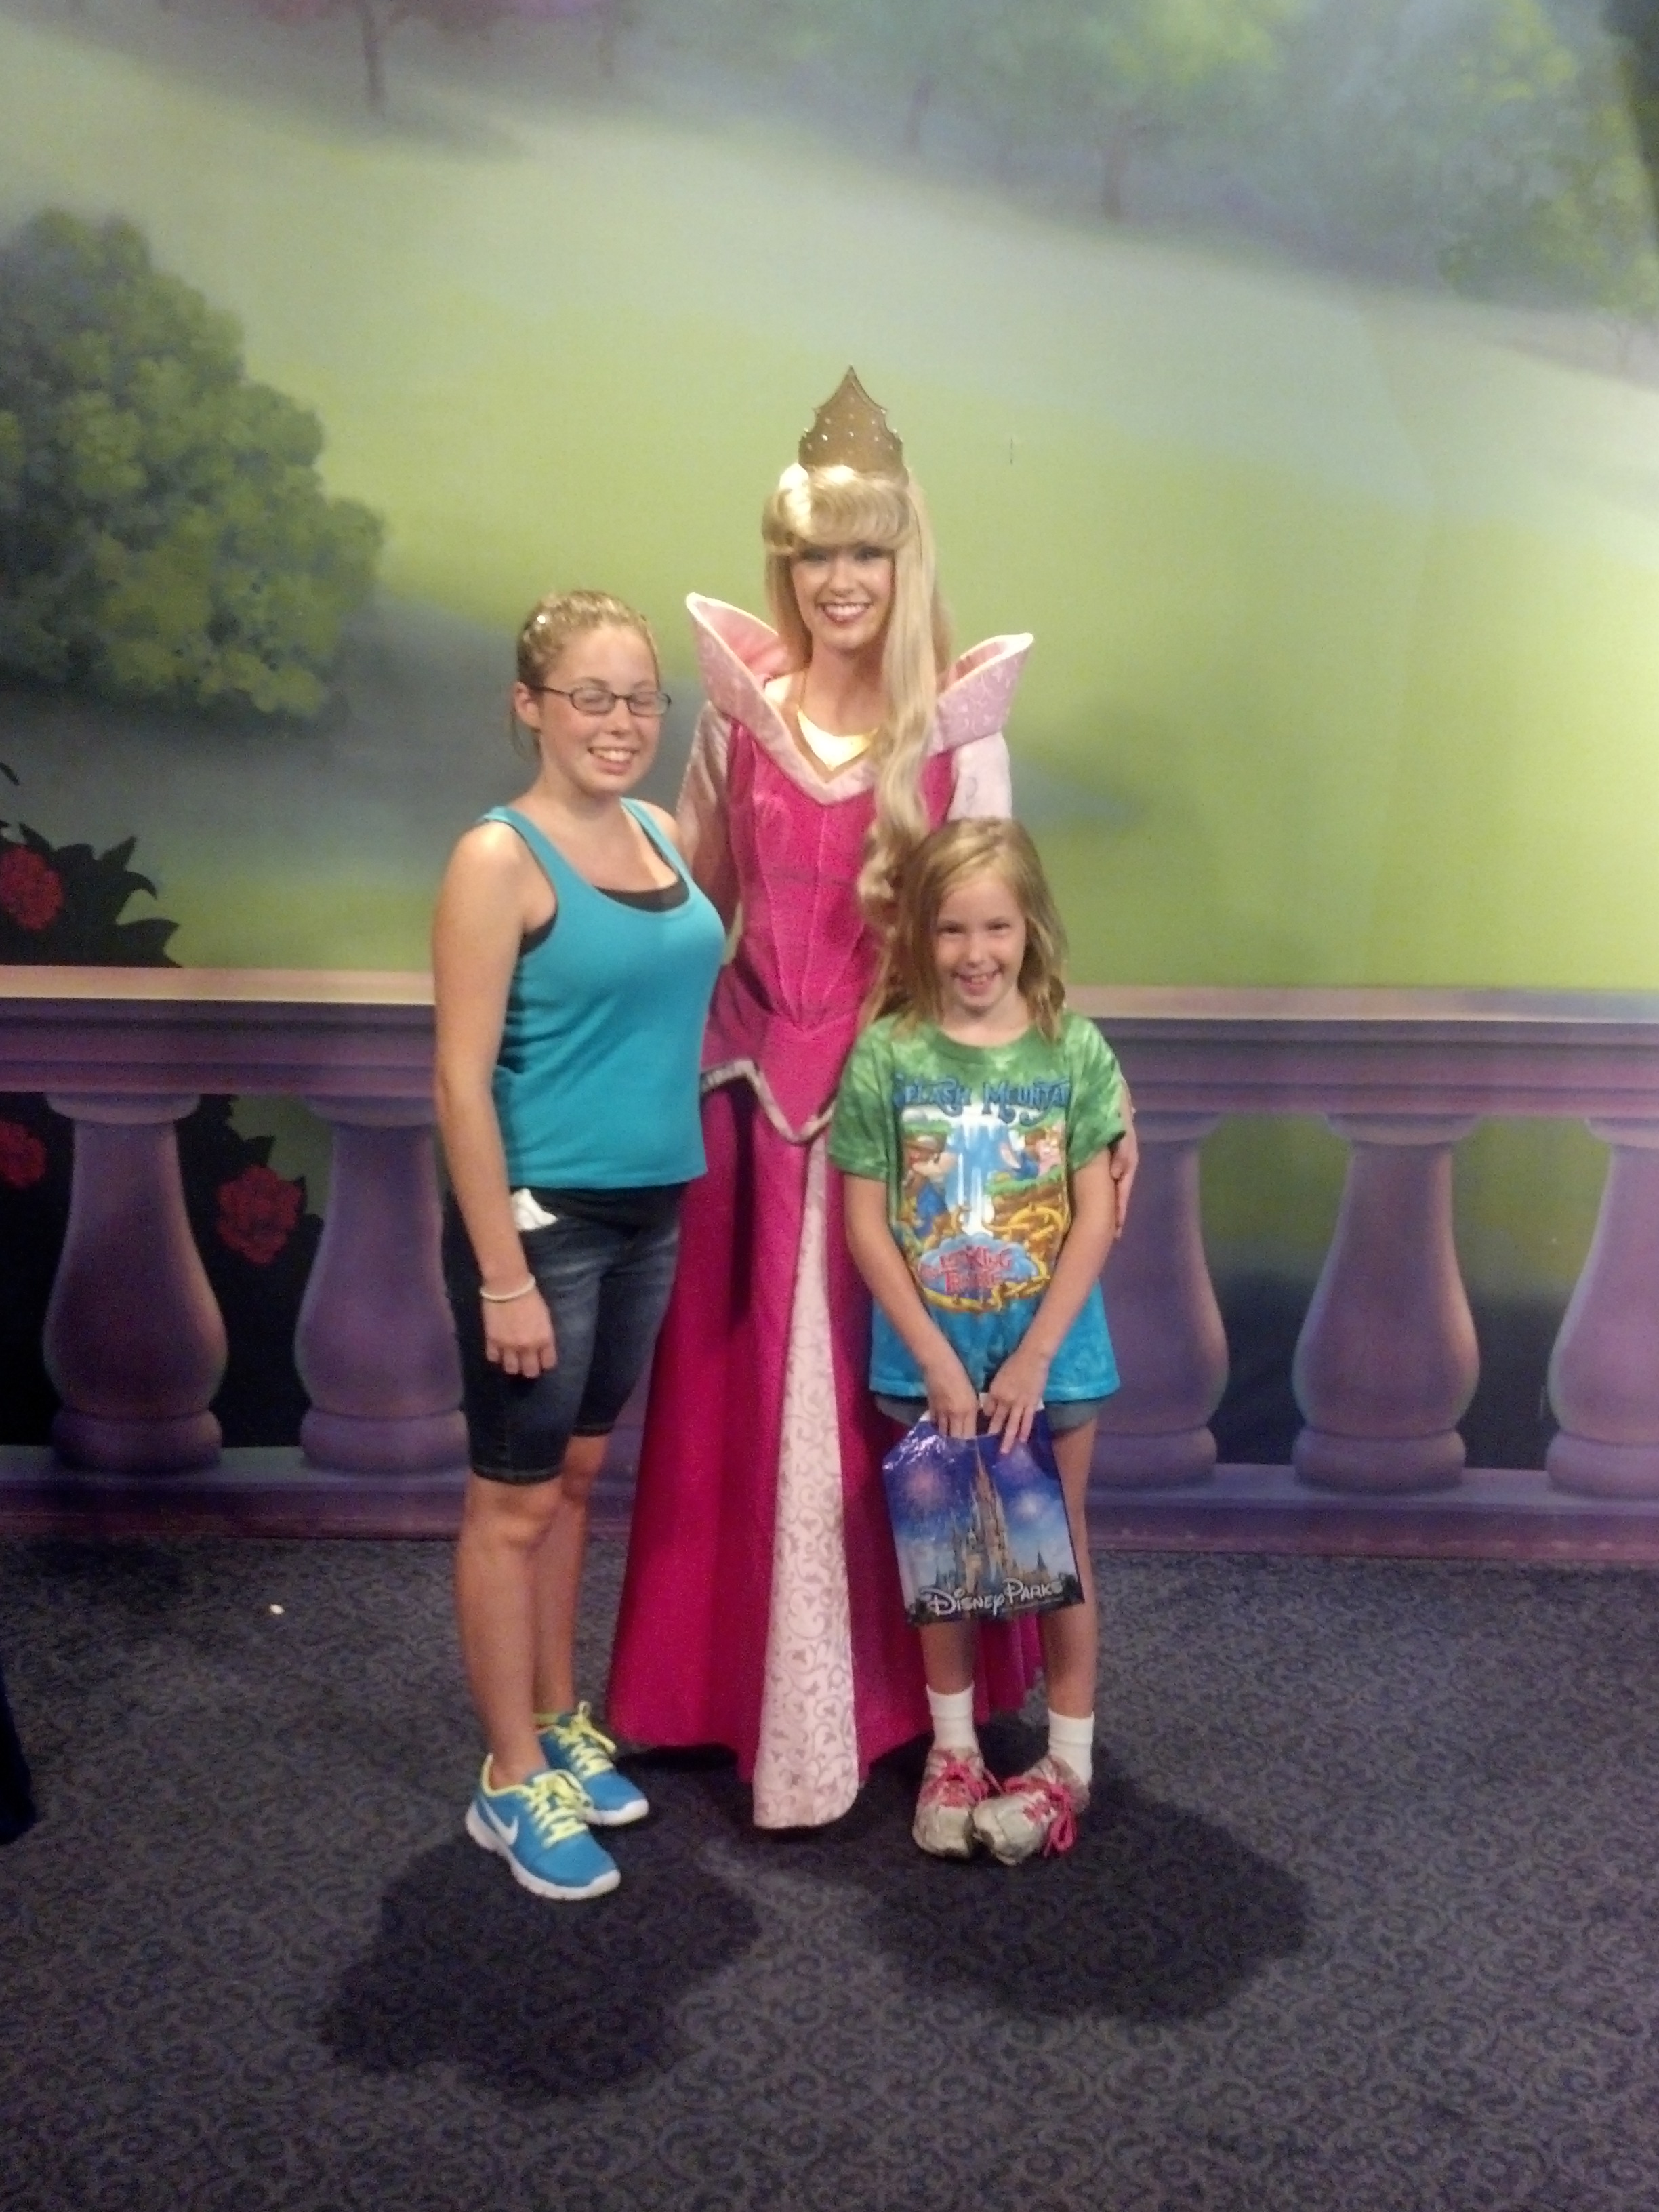 Aurora (Sleeping Beauty)  at Town Square Theater in Magic Kingdom 2012